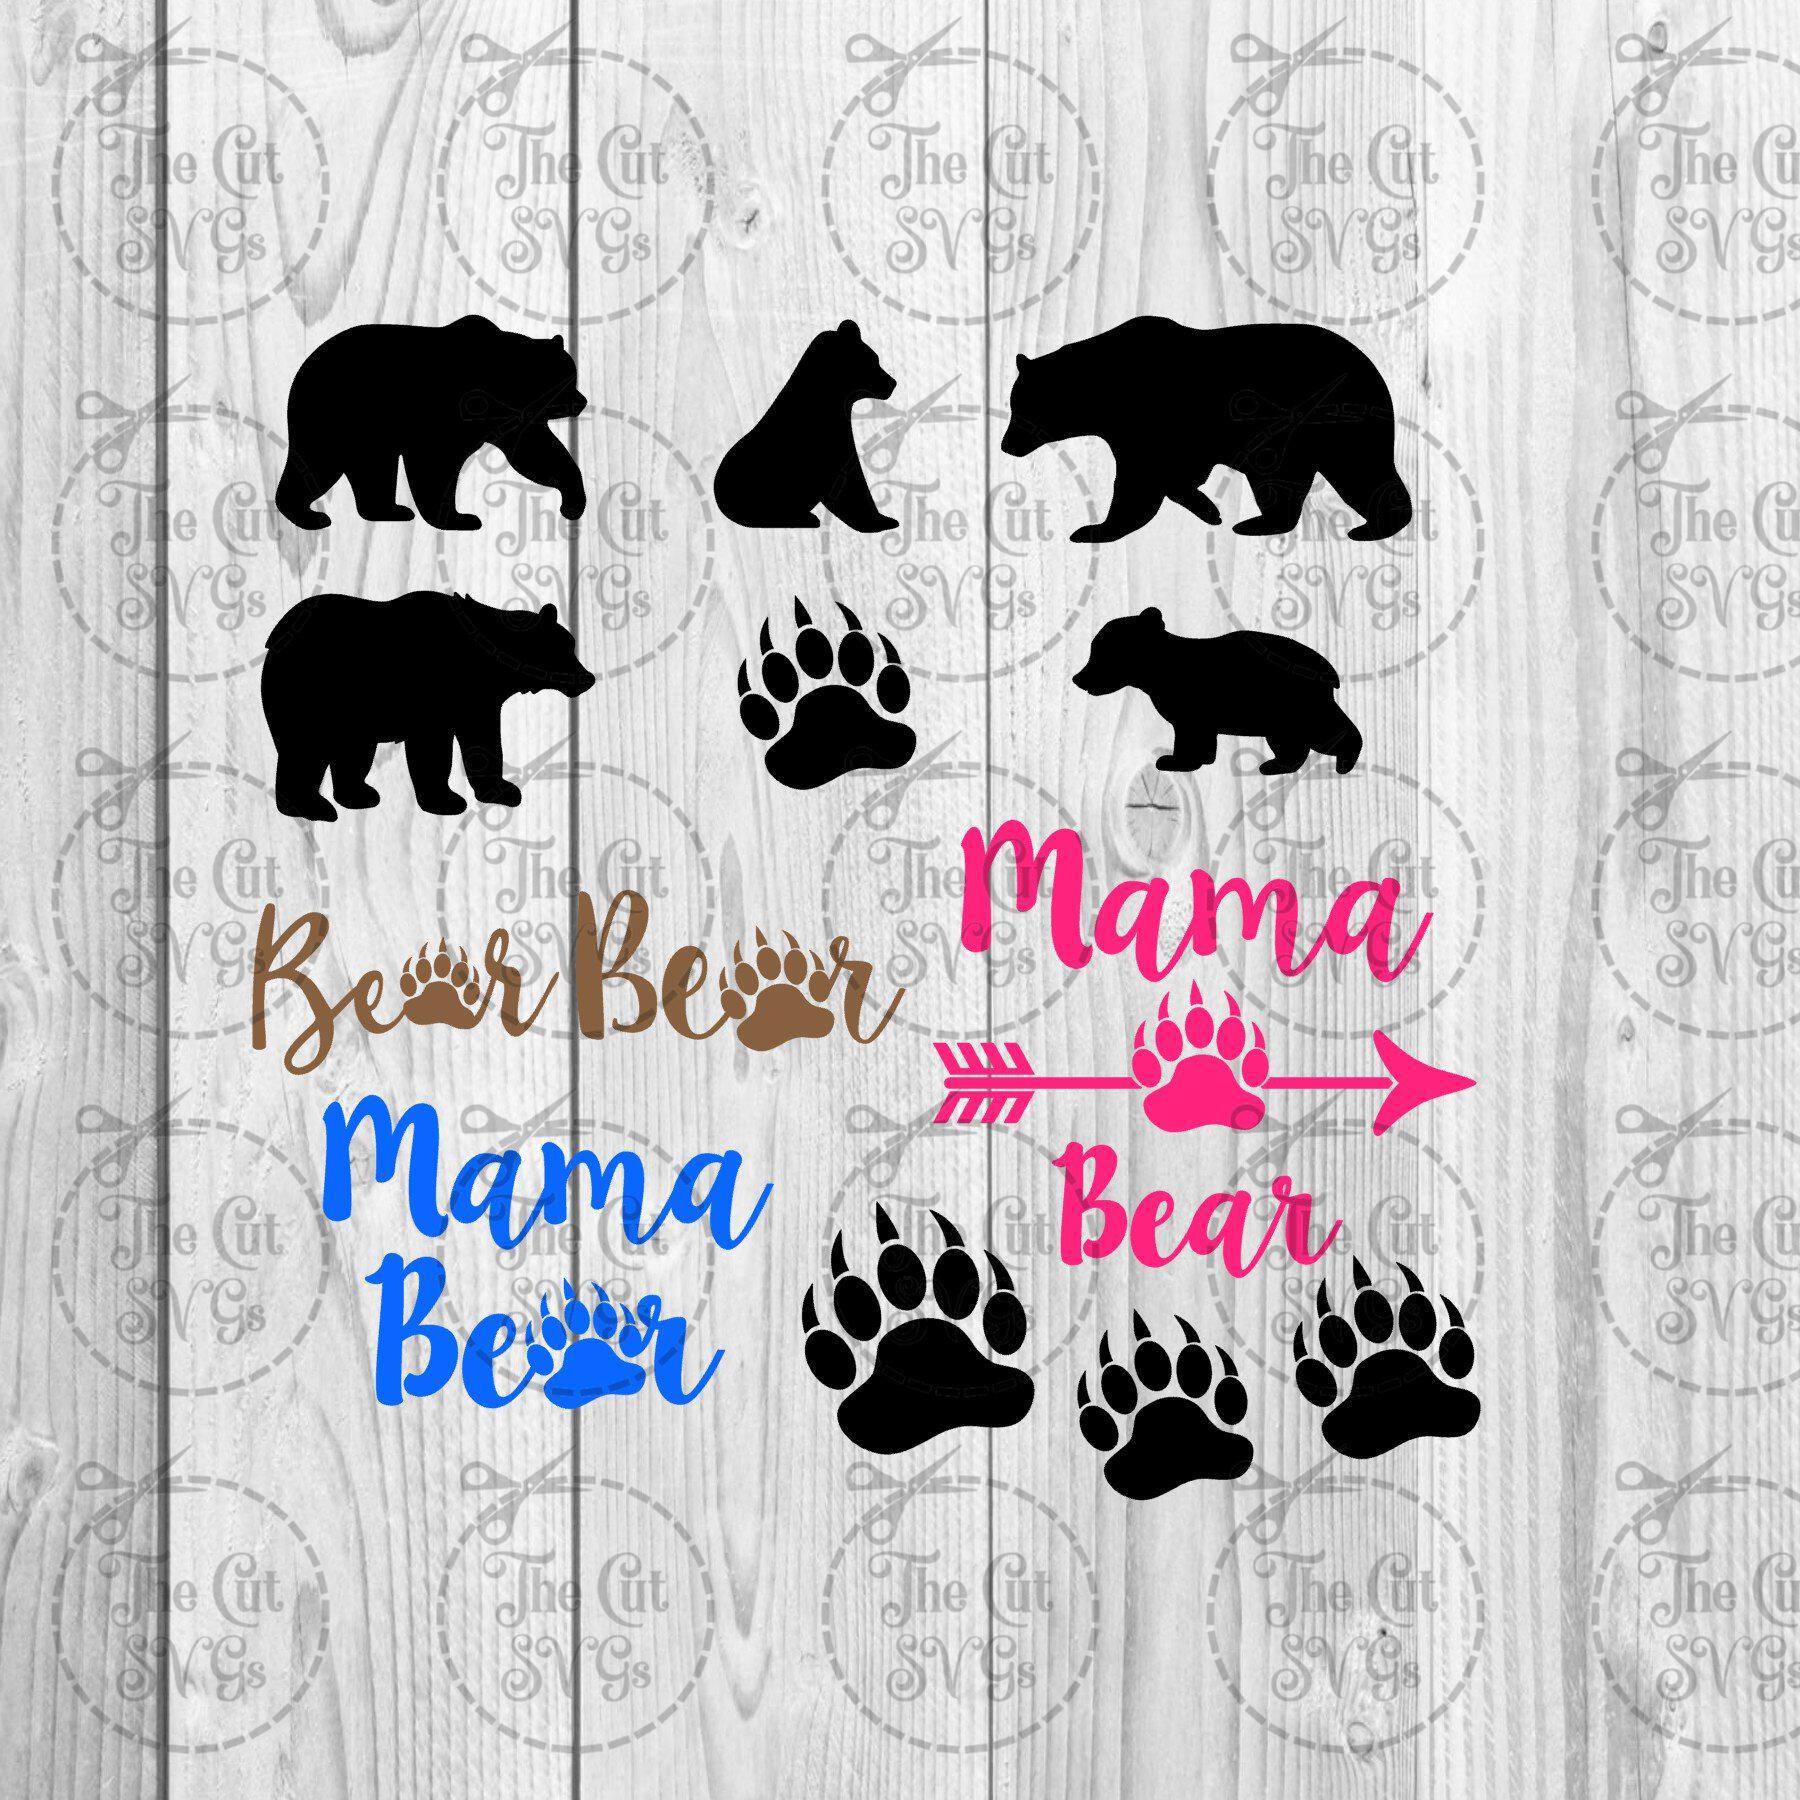 Download Handmade Supplies Digital Files Templates Svg Image Files Bear Family Svg Mama Bear Svg Baby Bear Svg Papa Bear Svg Nana Bear Svg Cricut Silhouette Svg Instant Download